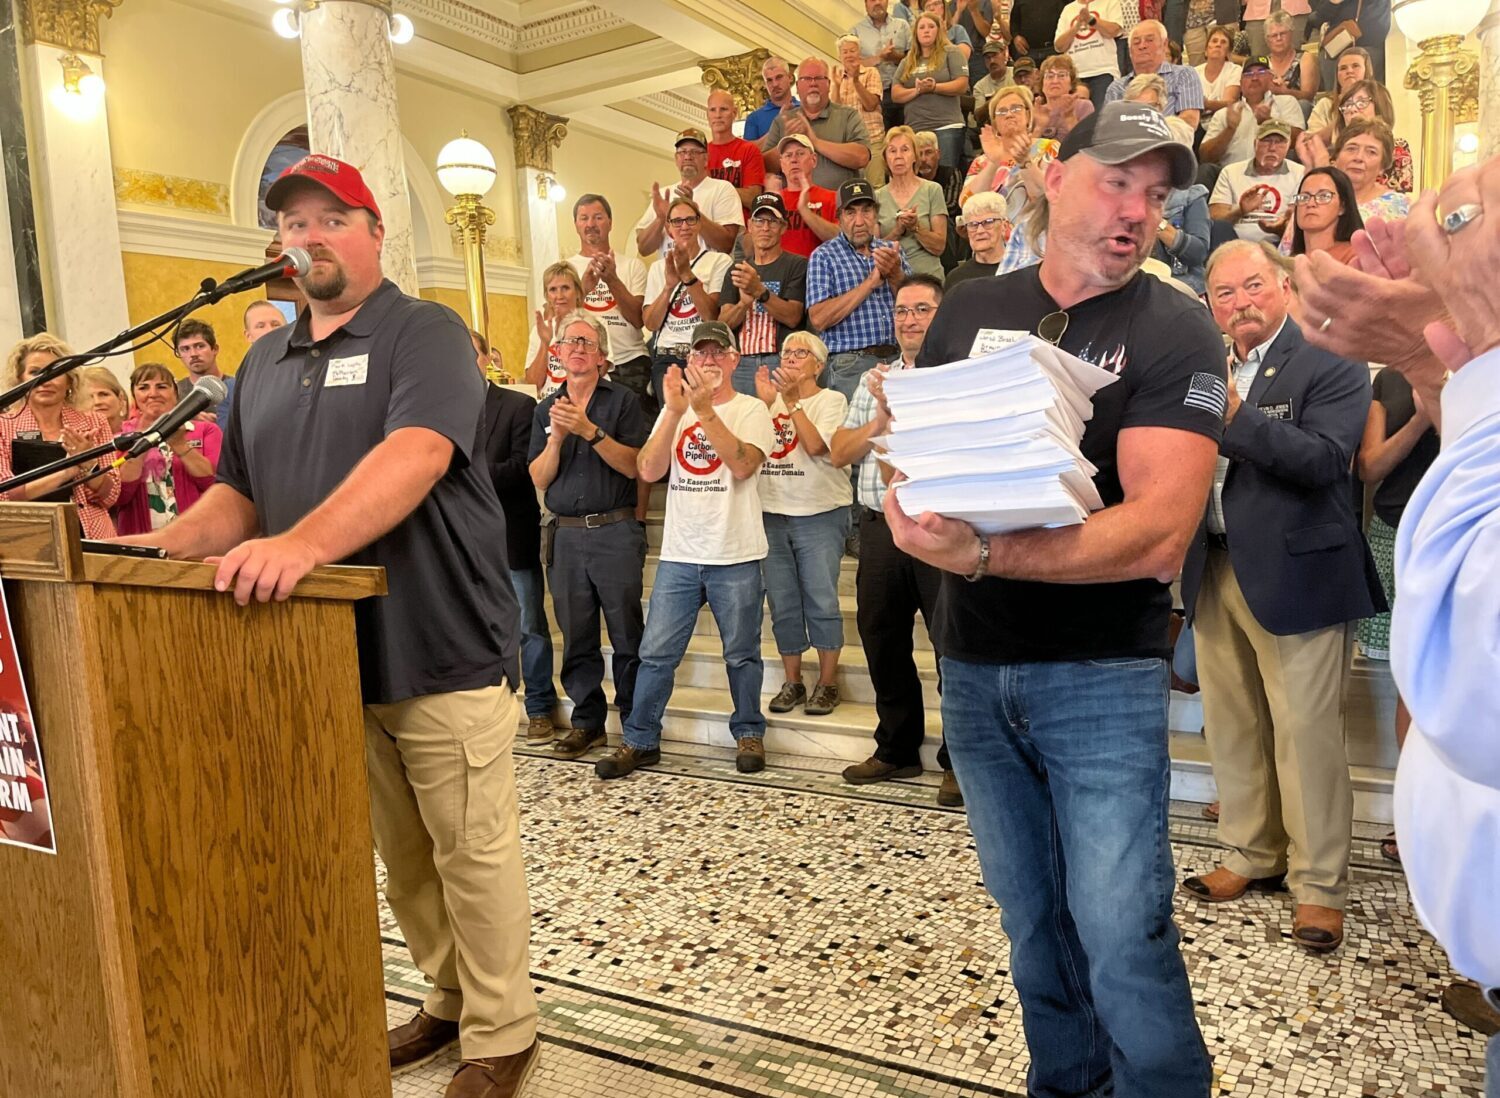 Landowners Mark Lapka of McPherson County, left, and Jared Bossly of Brown County, holding petitions with about 2,000 signatures, speak at the state Capitol in Pierre on July 6, demanding a prohibition against carbon capture pipeline companies gaining access to land against a landowner’s will. South Dakota Searchlight photo by Joshua HaiarCarbon pipelines